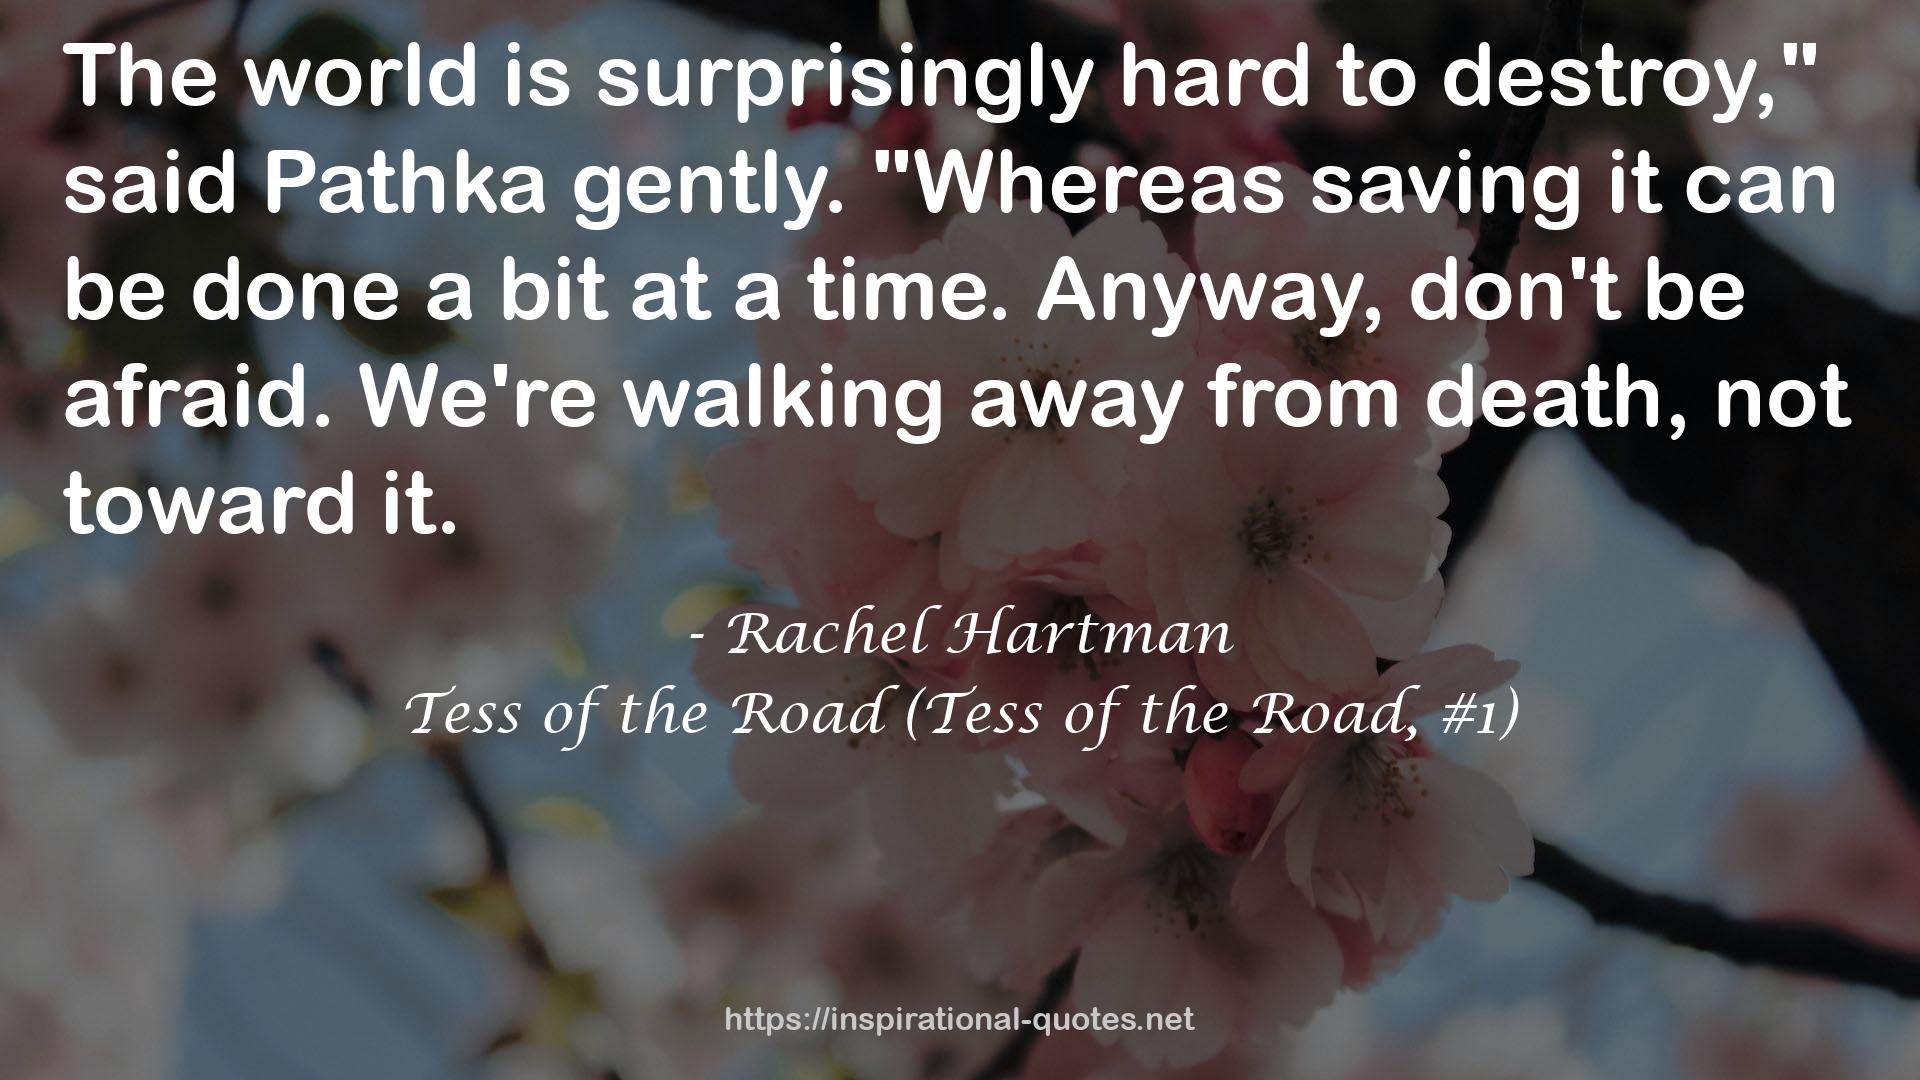 Tess of the Road (Tess of the Road, #1) QUOTES